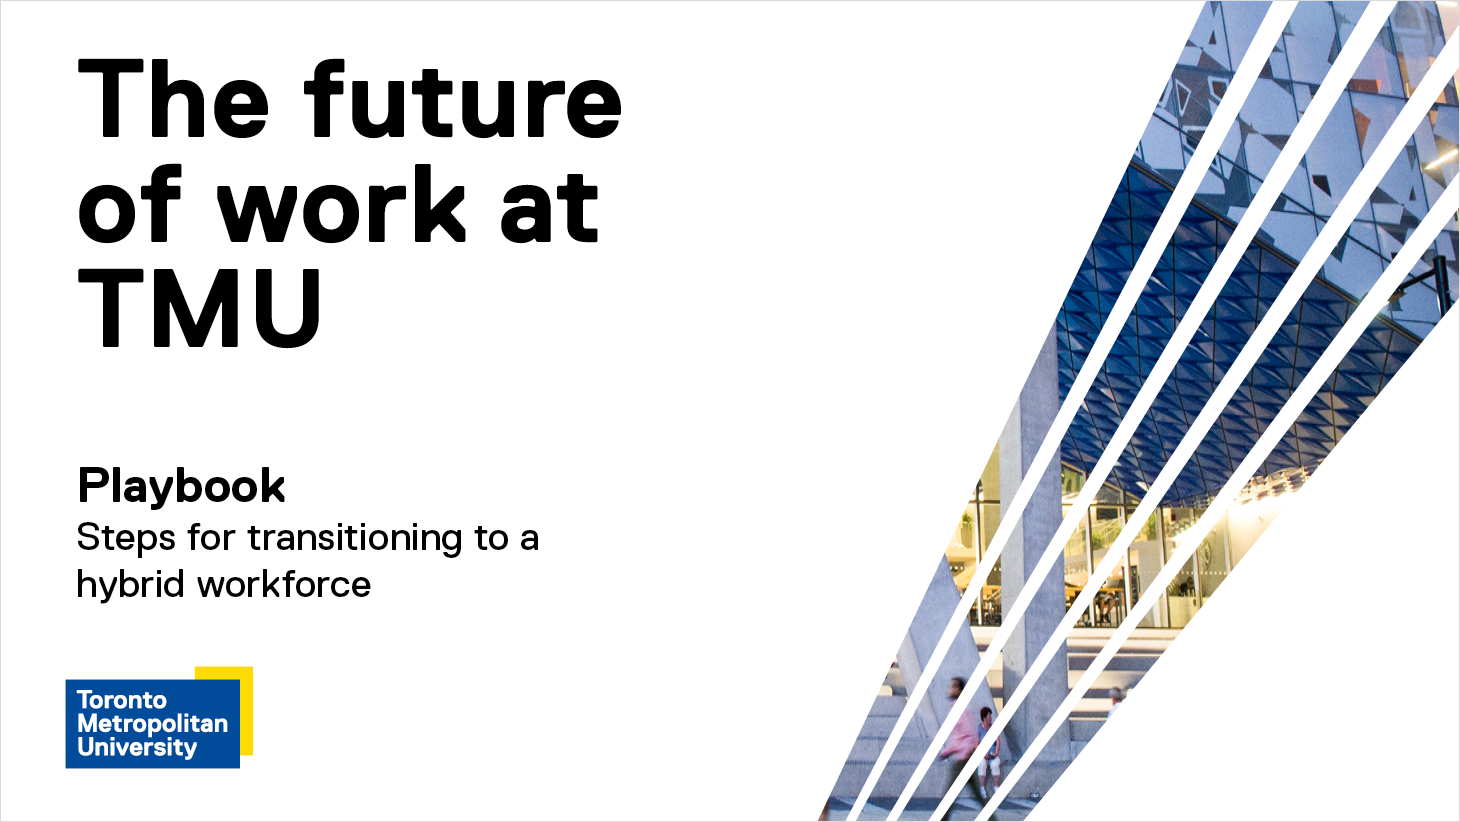 Links to the Future of Work at TMU Playbook - Steps for transitioning to a hybrid workforce.